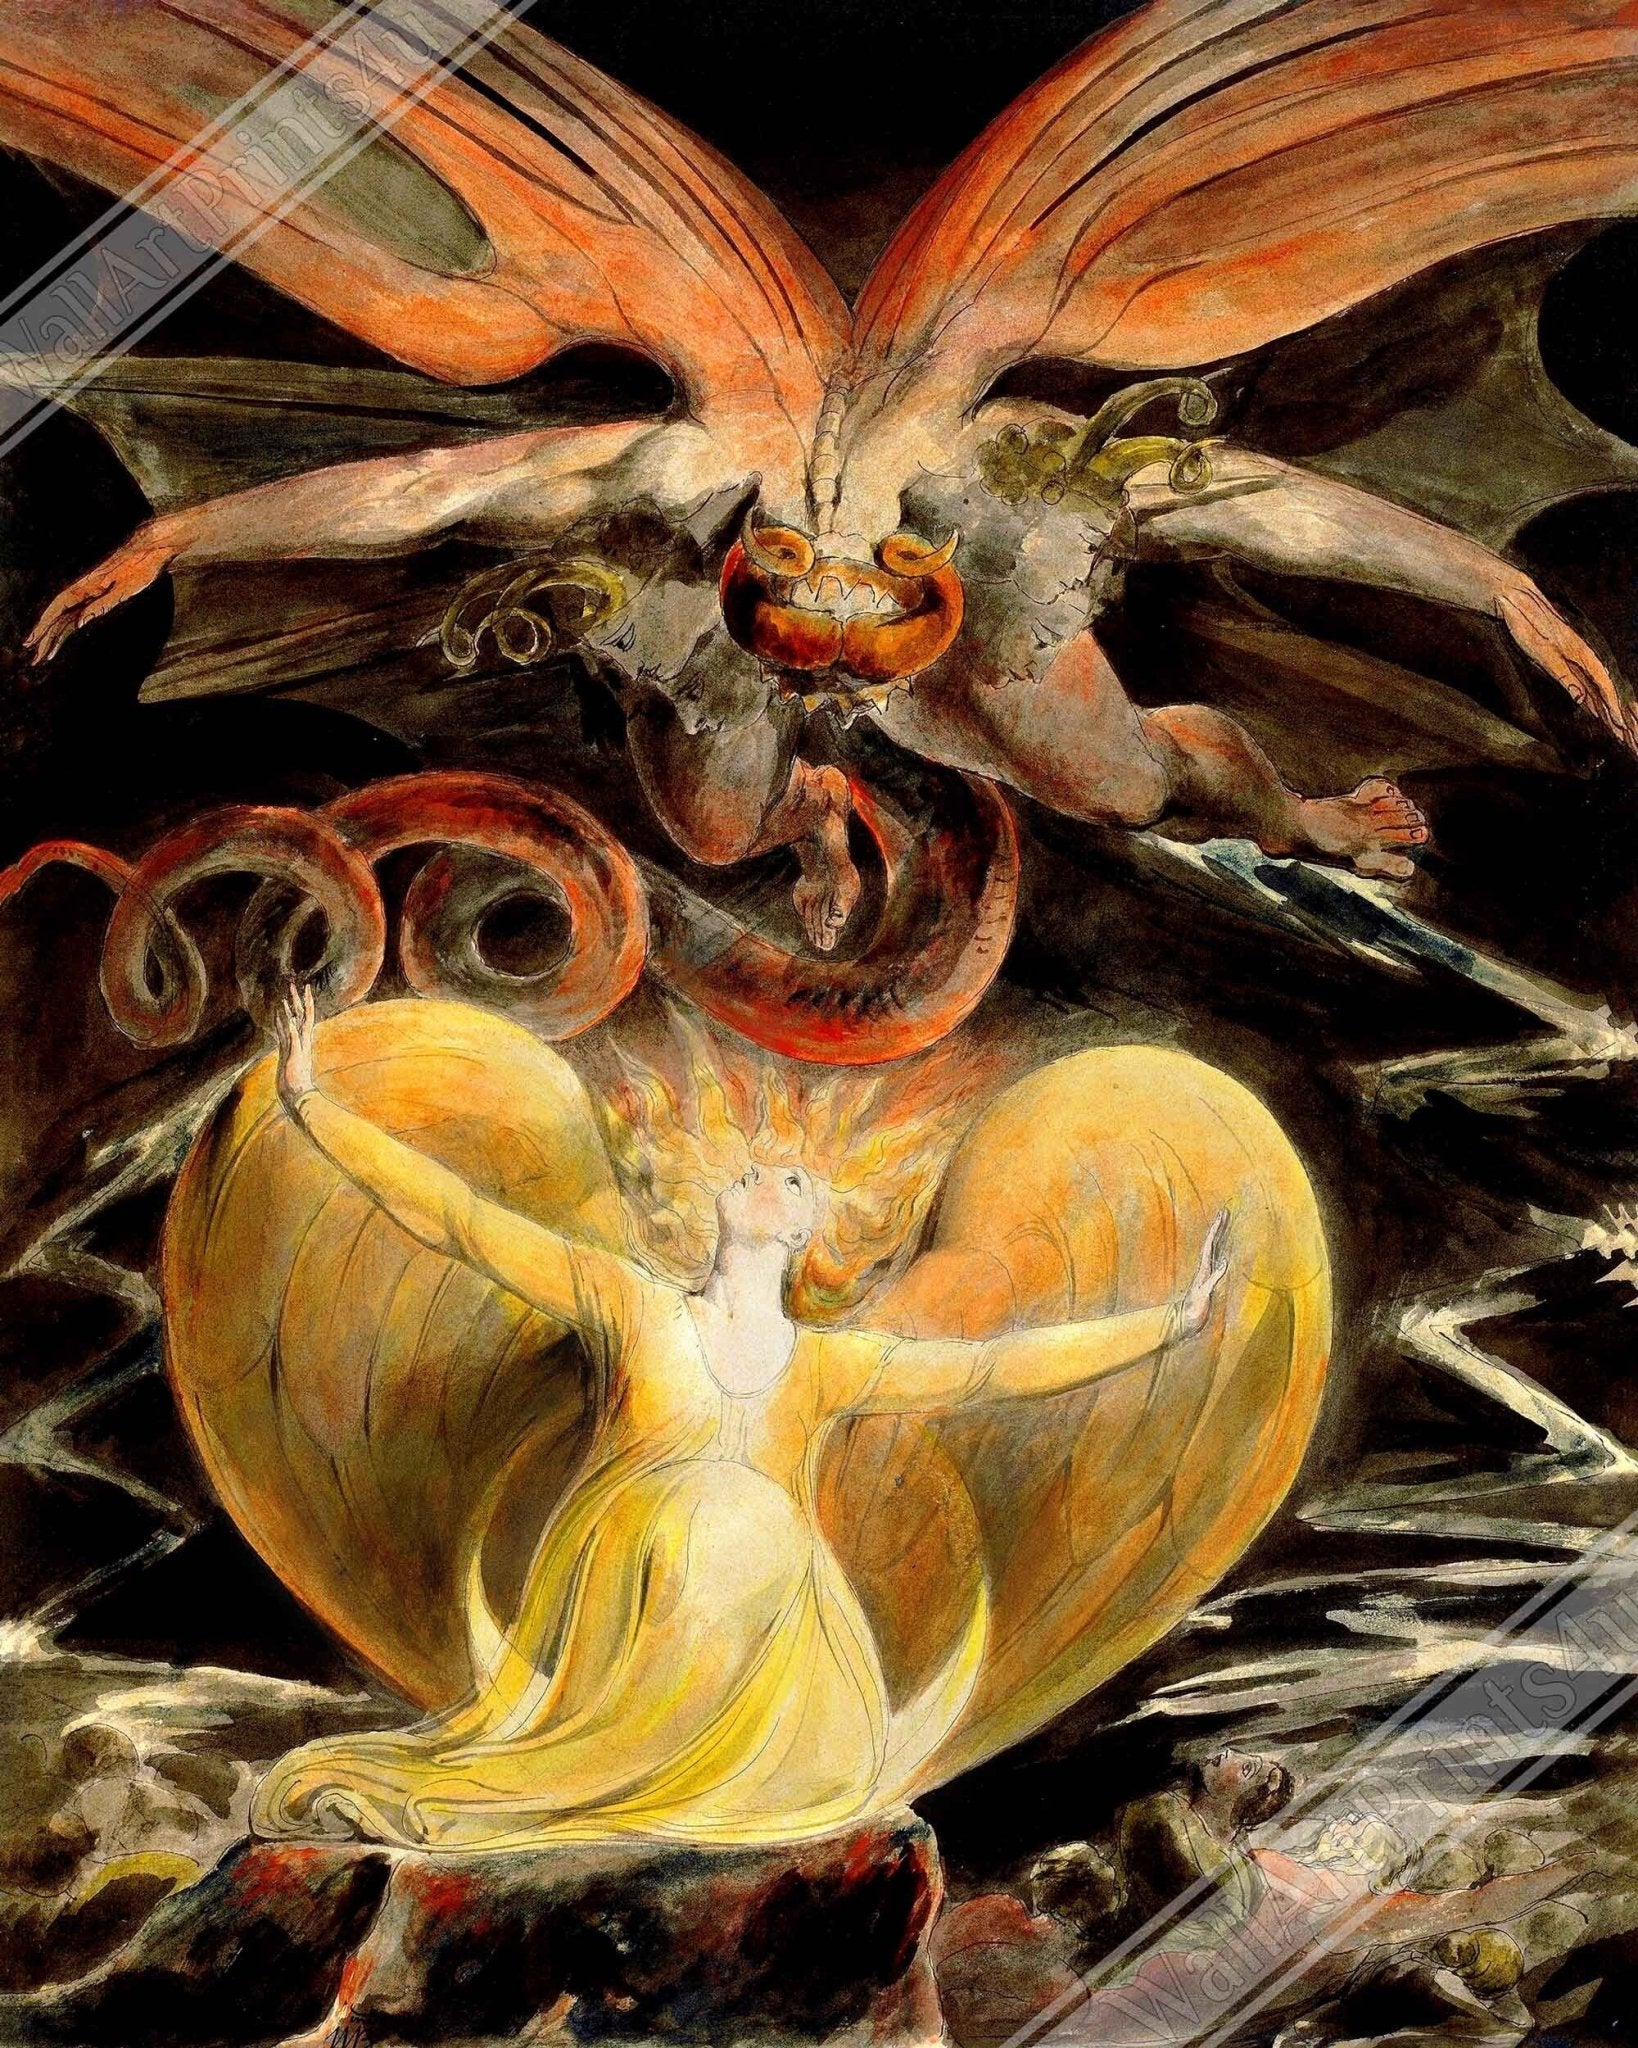 William Blake Poster, The Great Red Dragon And The Woman Clothed In The Sun 2nd Painting - WallArtPrints4U